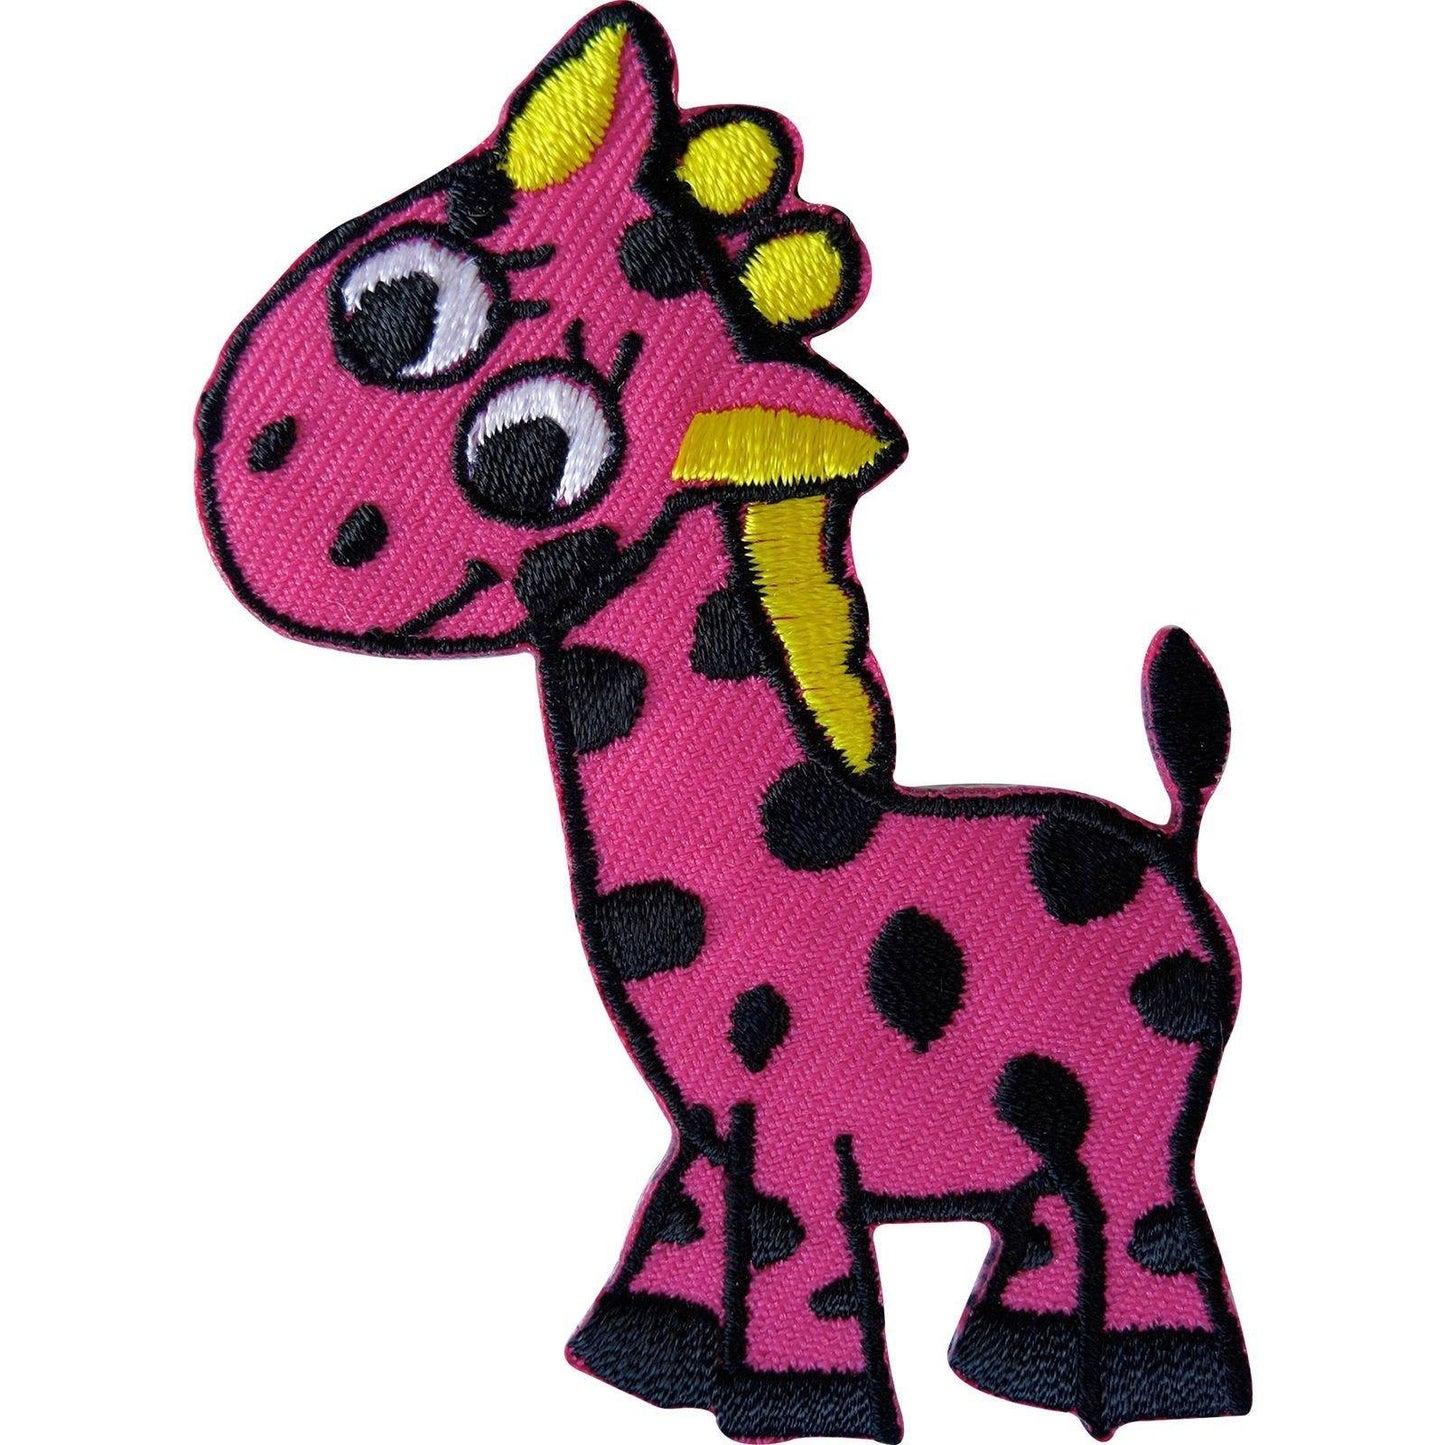 Iron On Sew On Embroidered Giraffe Patch Badge Appliqué Motif Kids Crafts Shirt